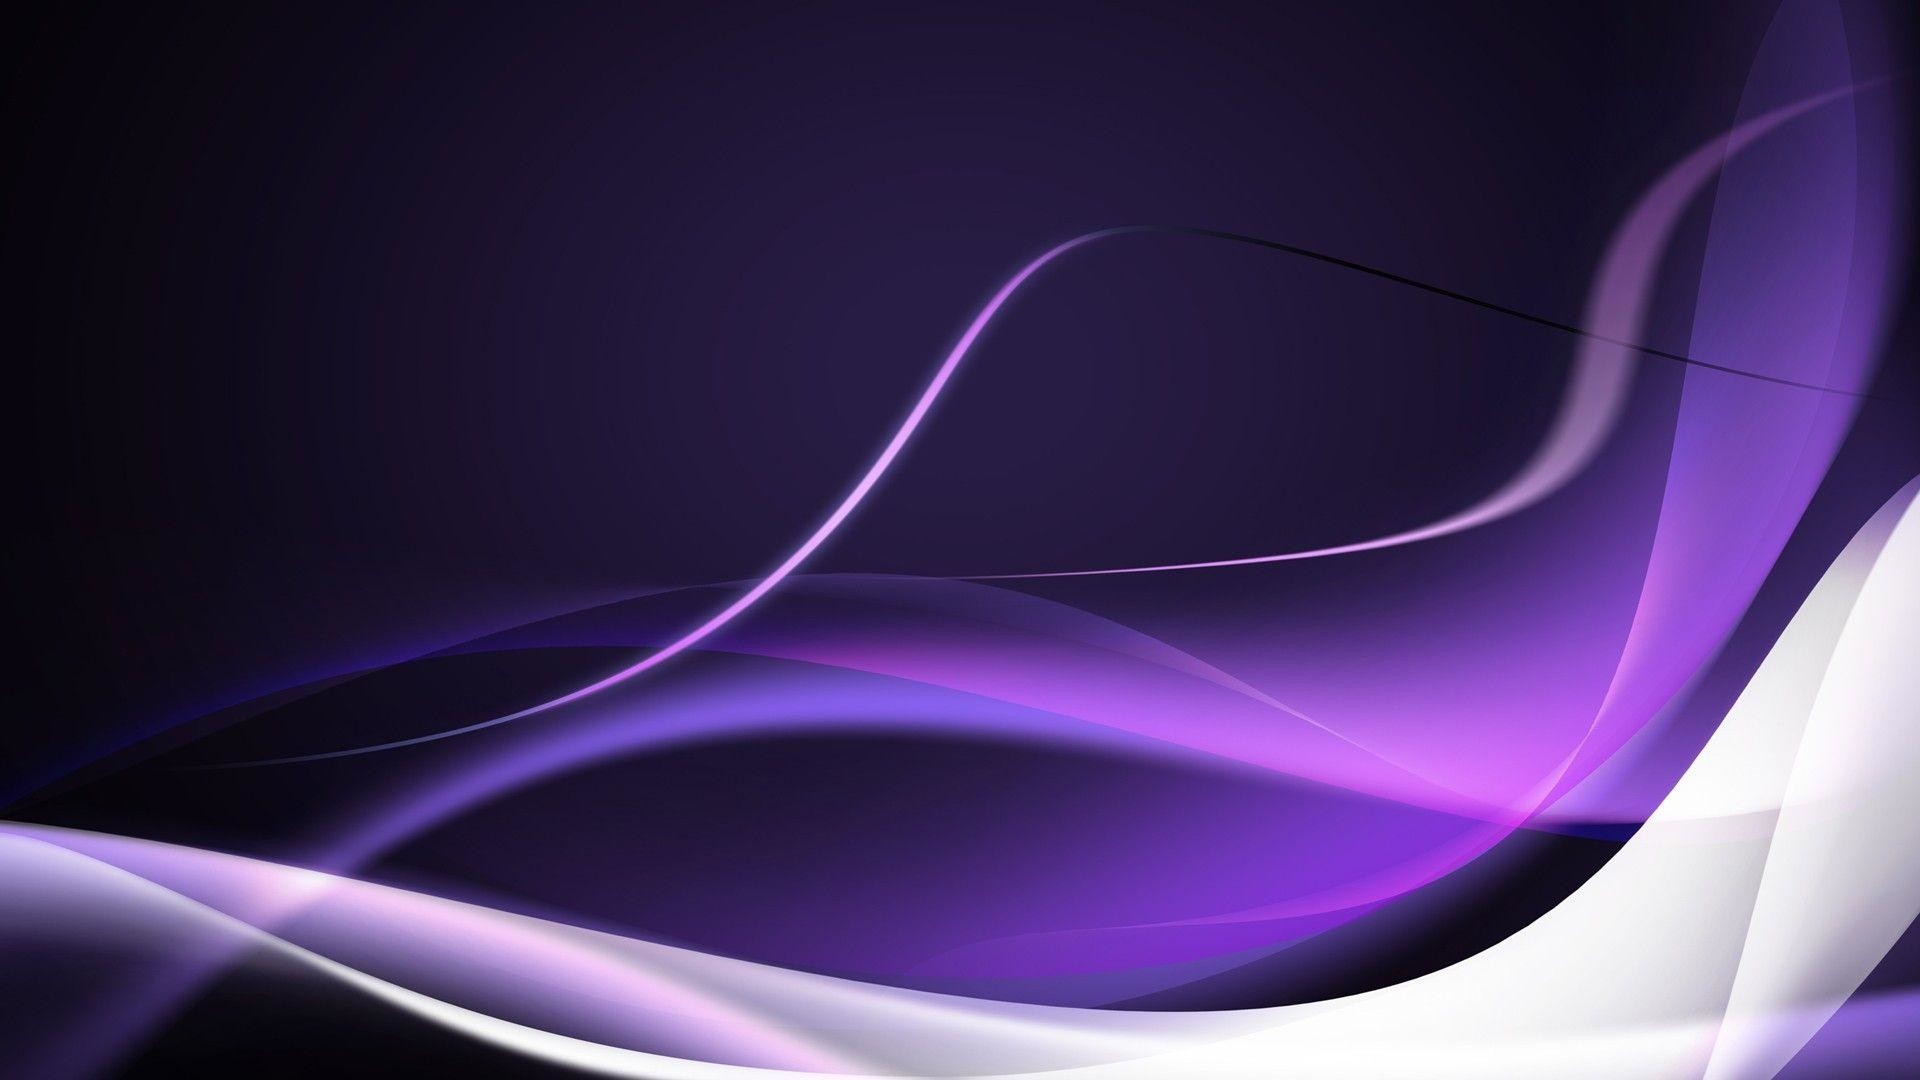 1920x1080 Purple And White Background Wallpaper | Wallpaper Color